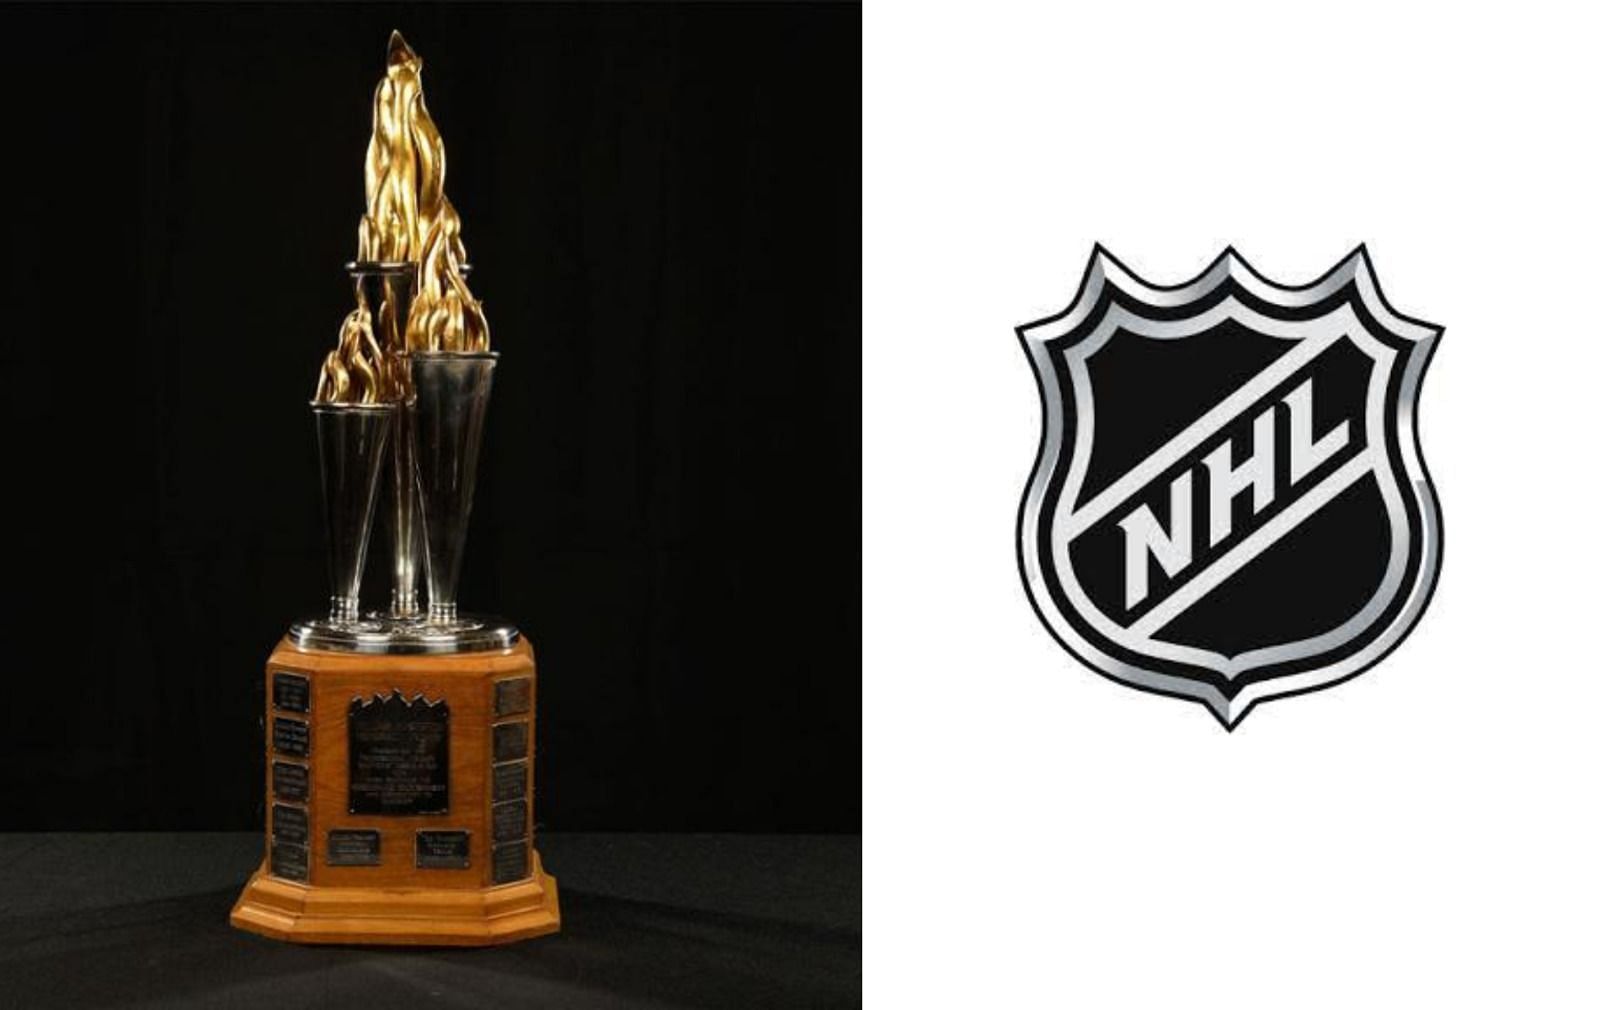  Players have been nominated for the Bill Masterton trophy